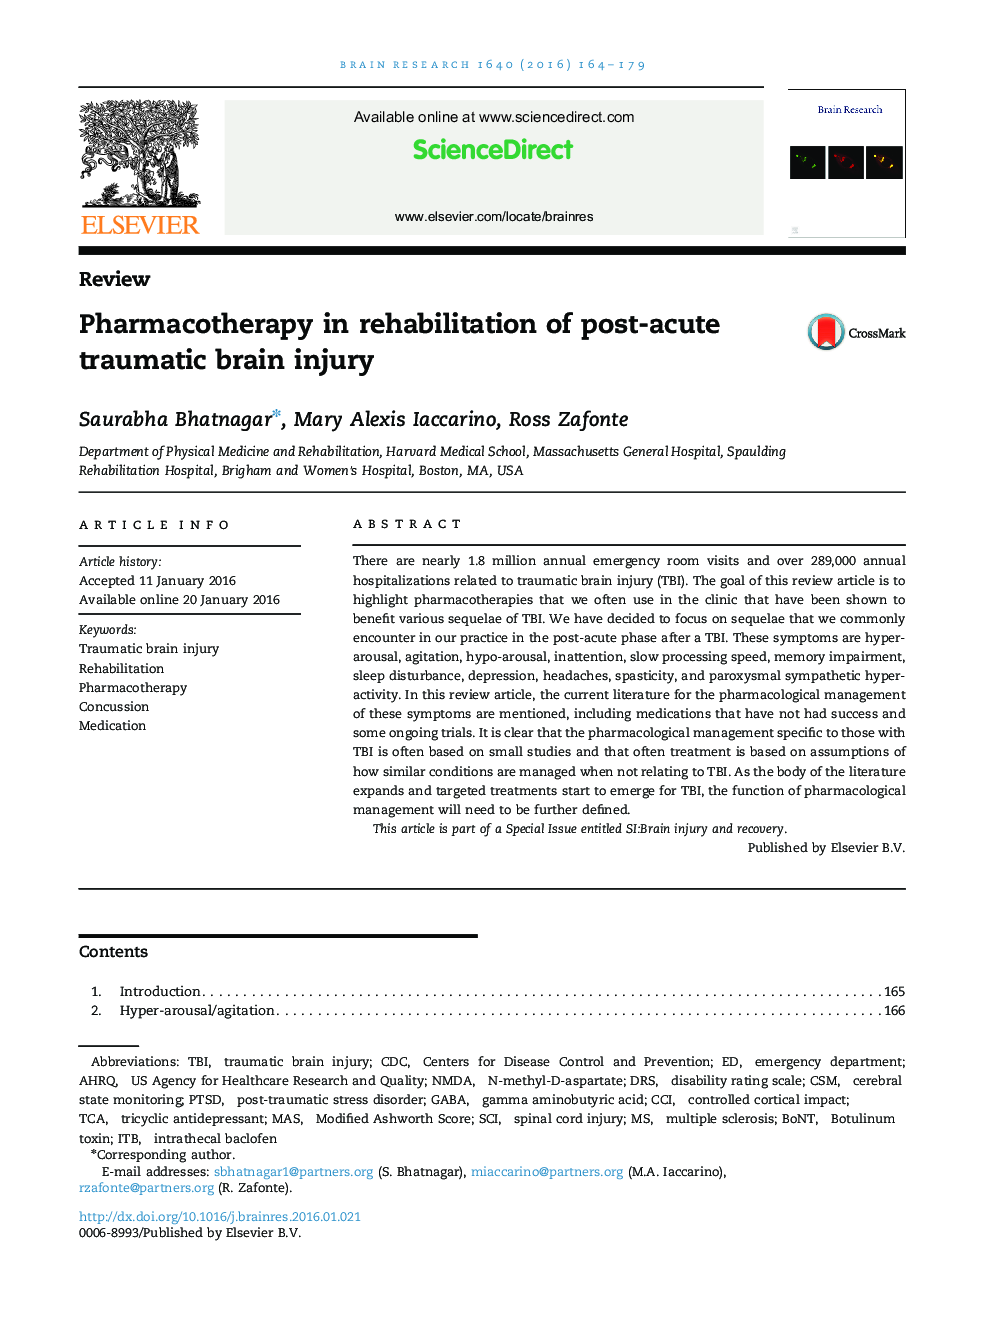 Pharmacotherapy in rehabilitation of post-acute traumatic brain injury